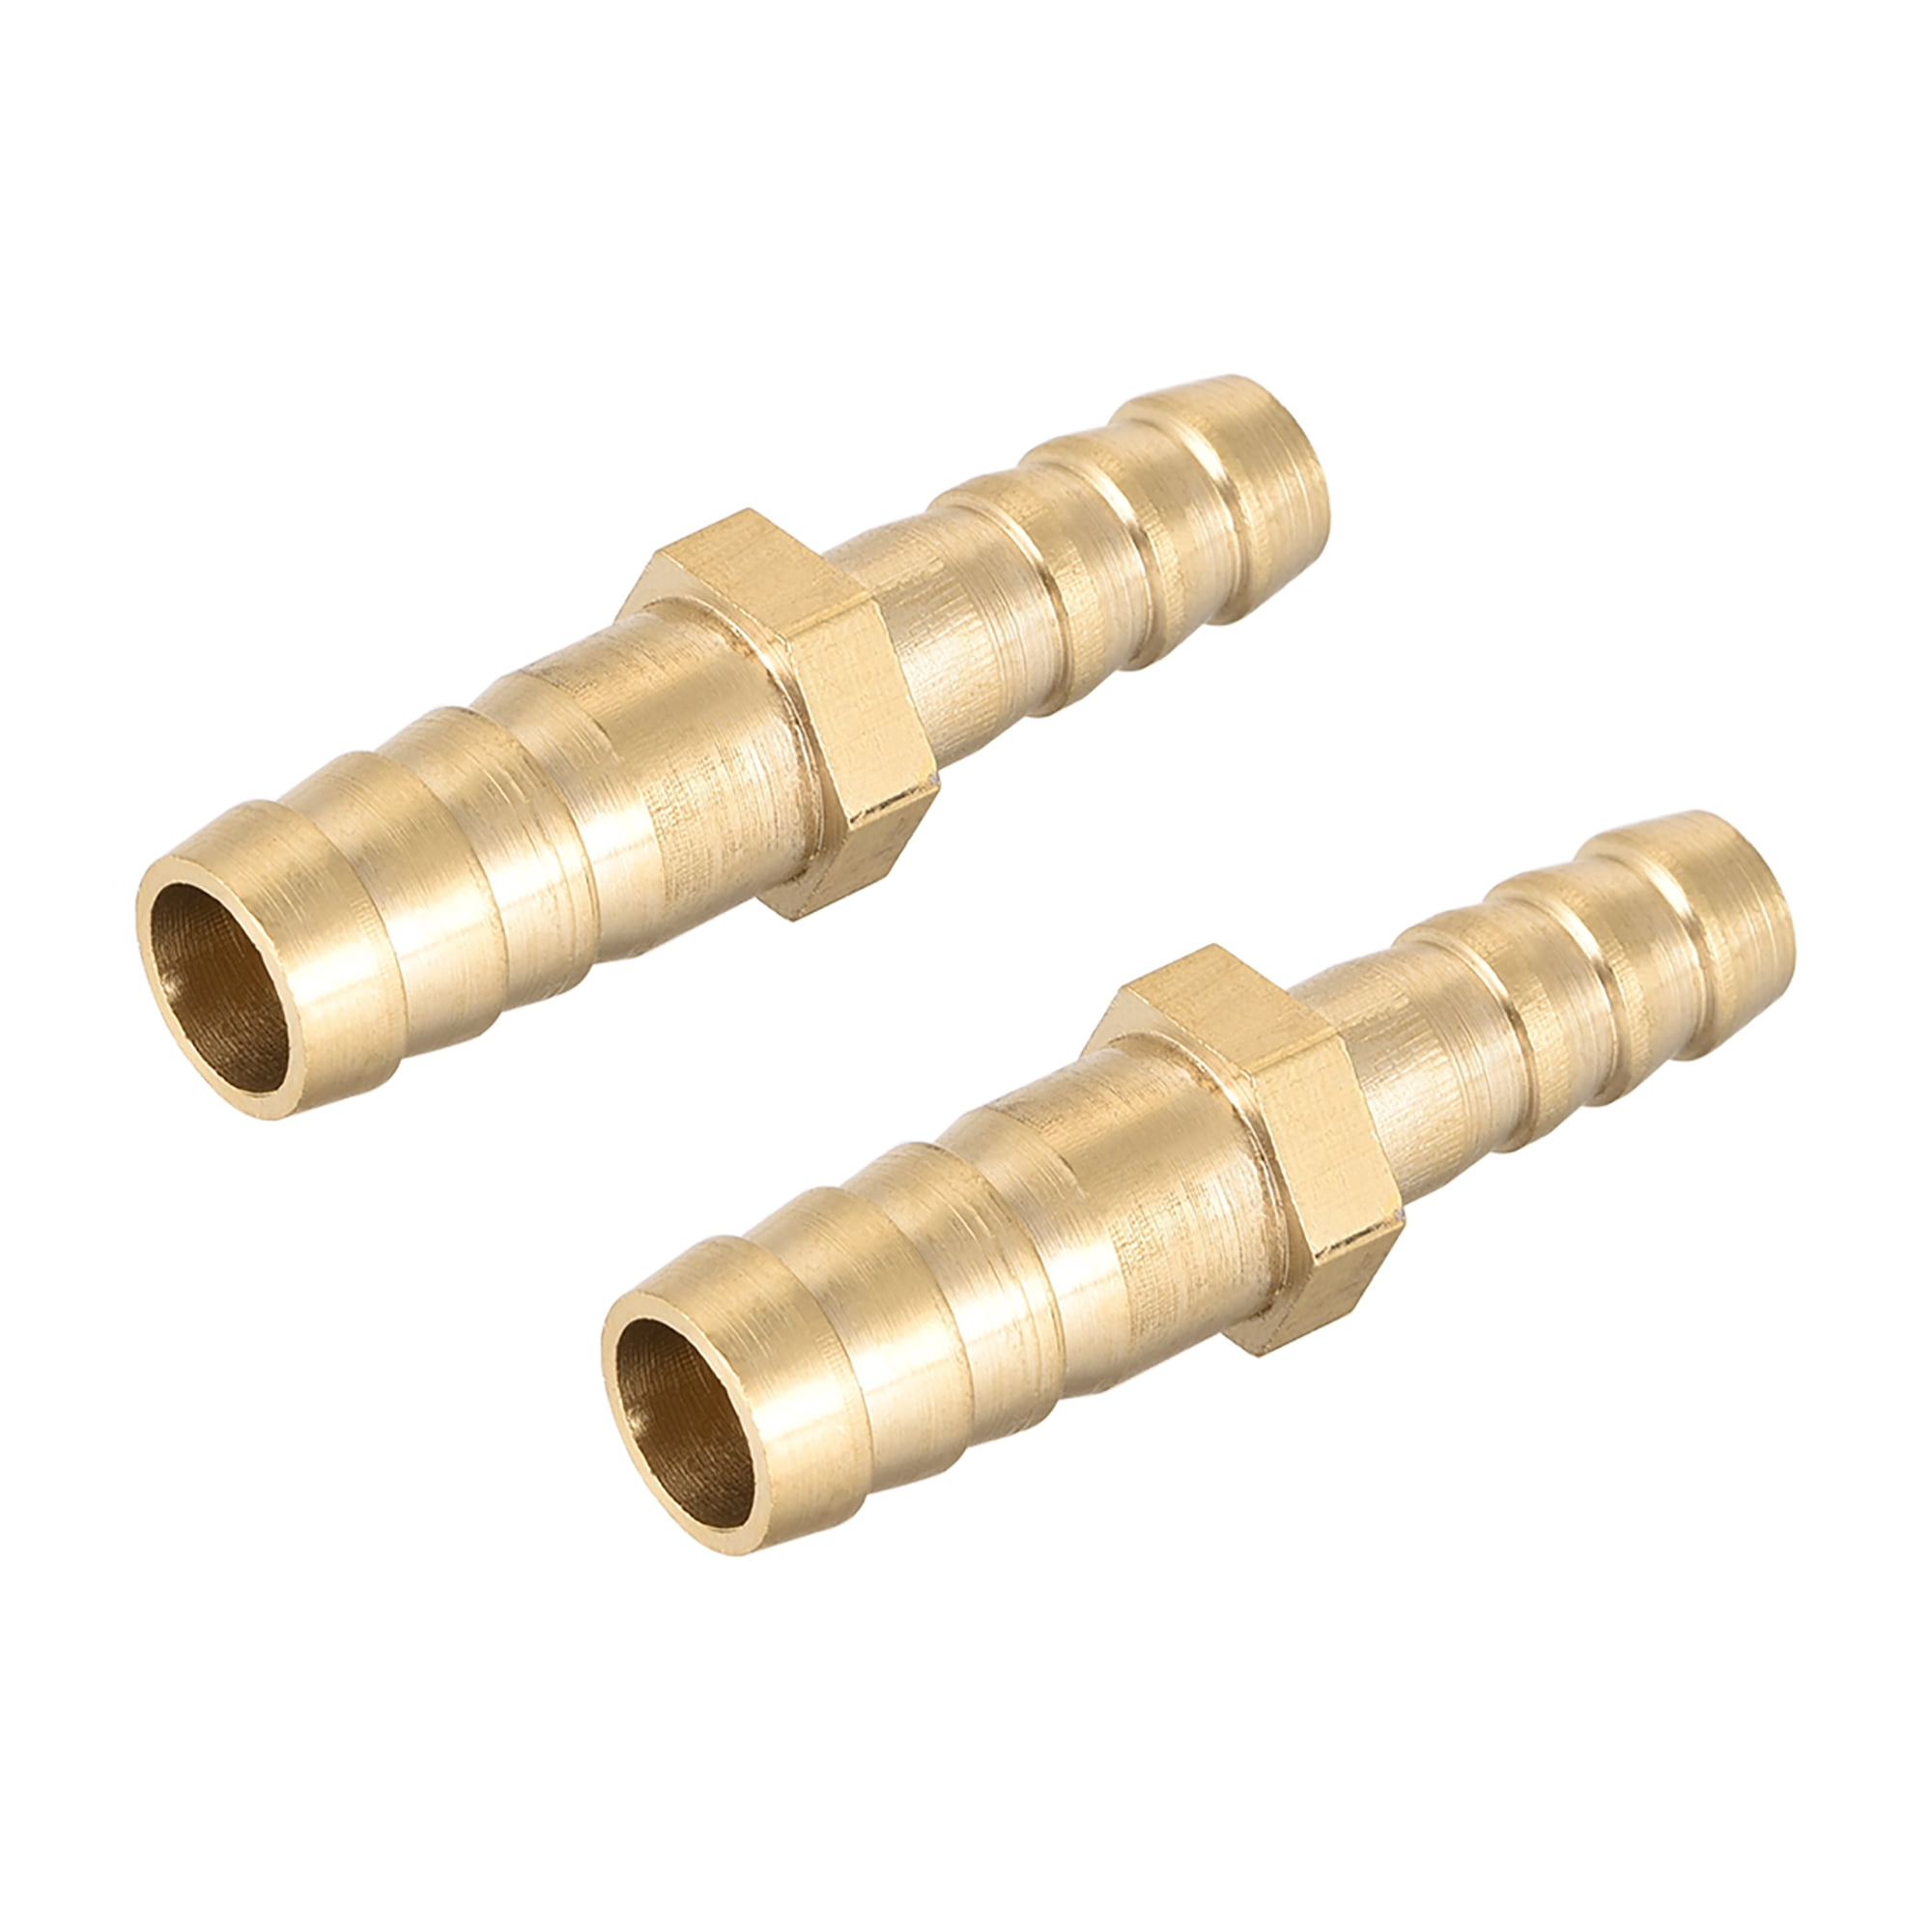 PACK OF 6 BRASS 10mm x 8mm STRAIGHT REDUCER COMPRESSION PIPE FITTING CONNECTORS 